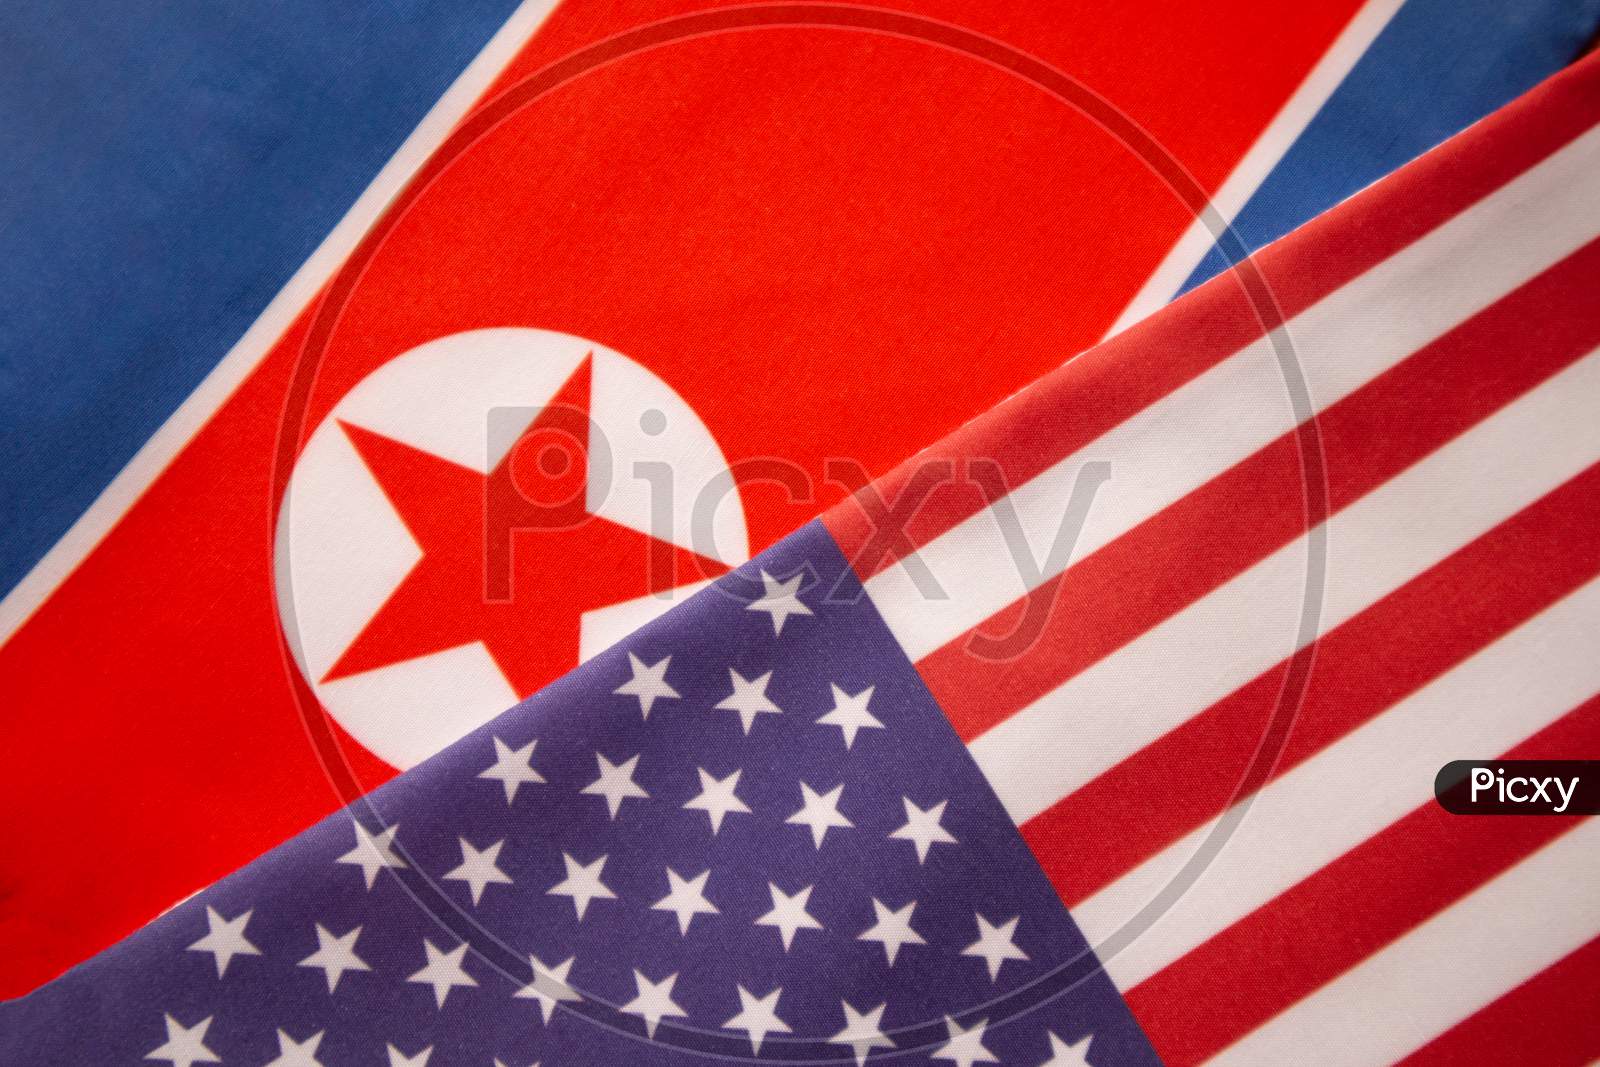 Concept Of Bilateral Relationship Between Two Countries Showing With Two Flags: United States Of America And North Korea.